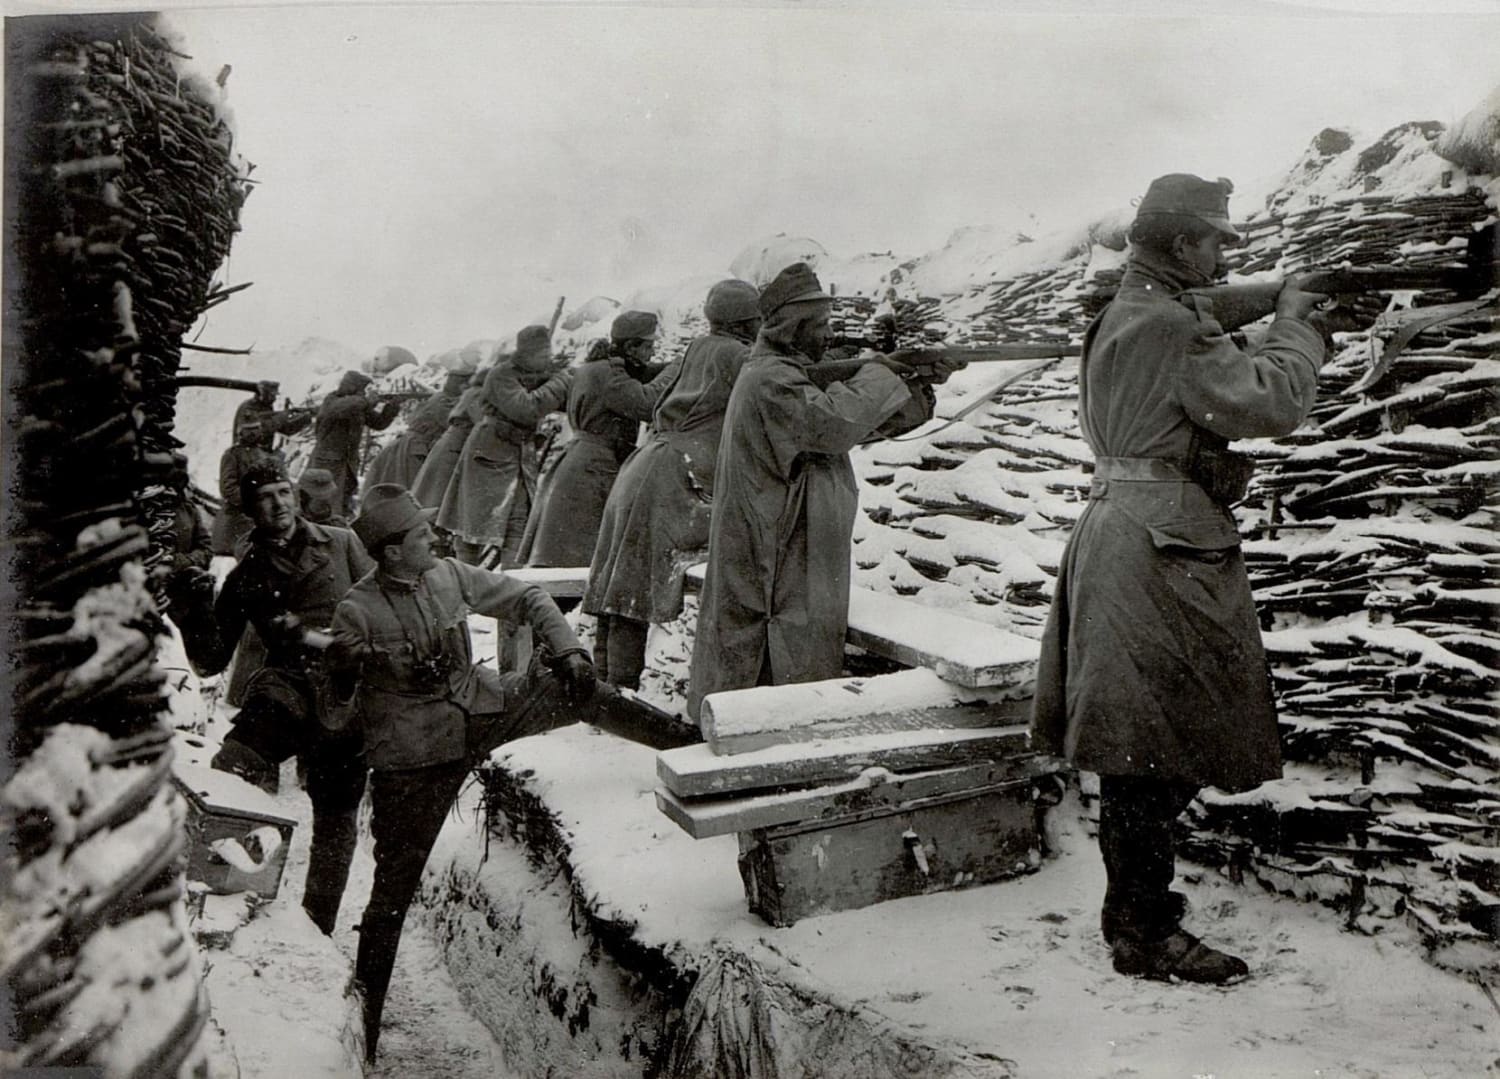 Snowy Austro-Hungarian trench in Carpathian mountains, during winter battles against Russians, 1915